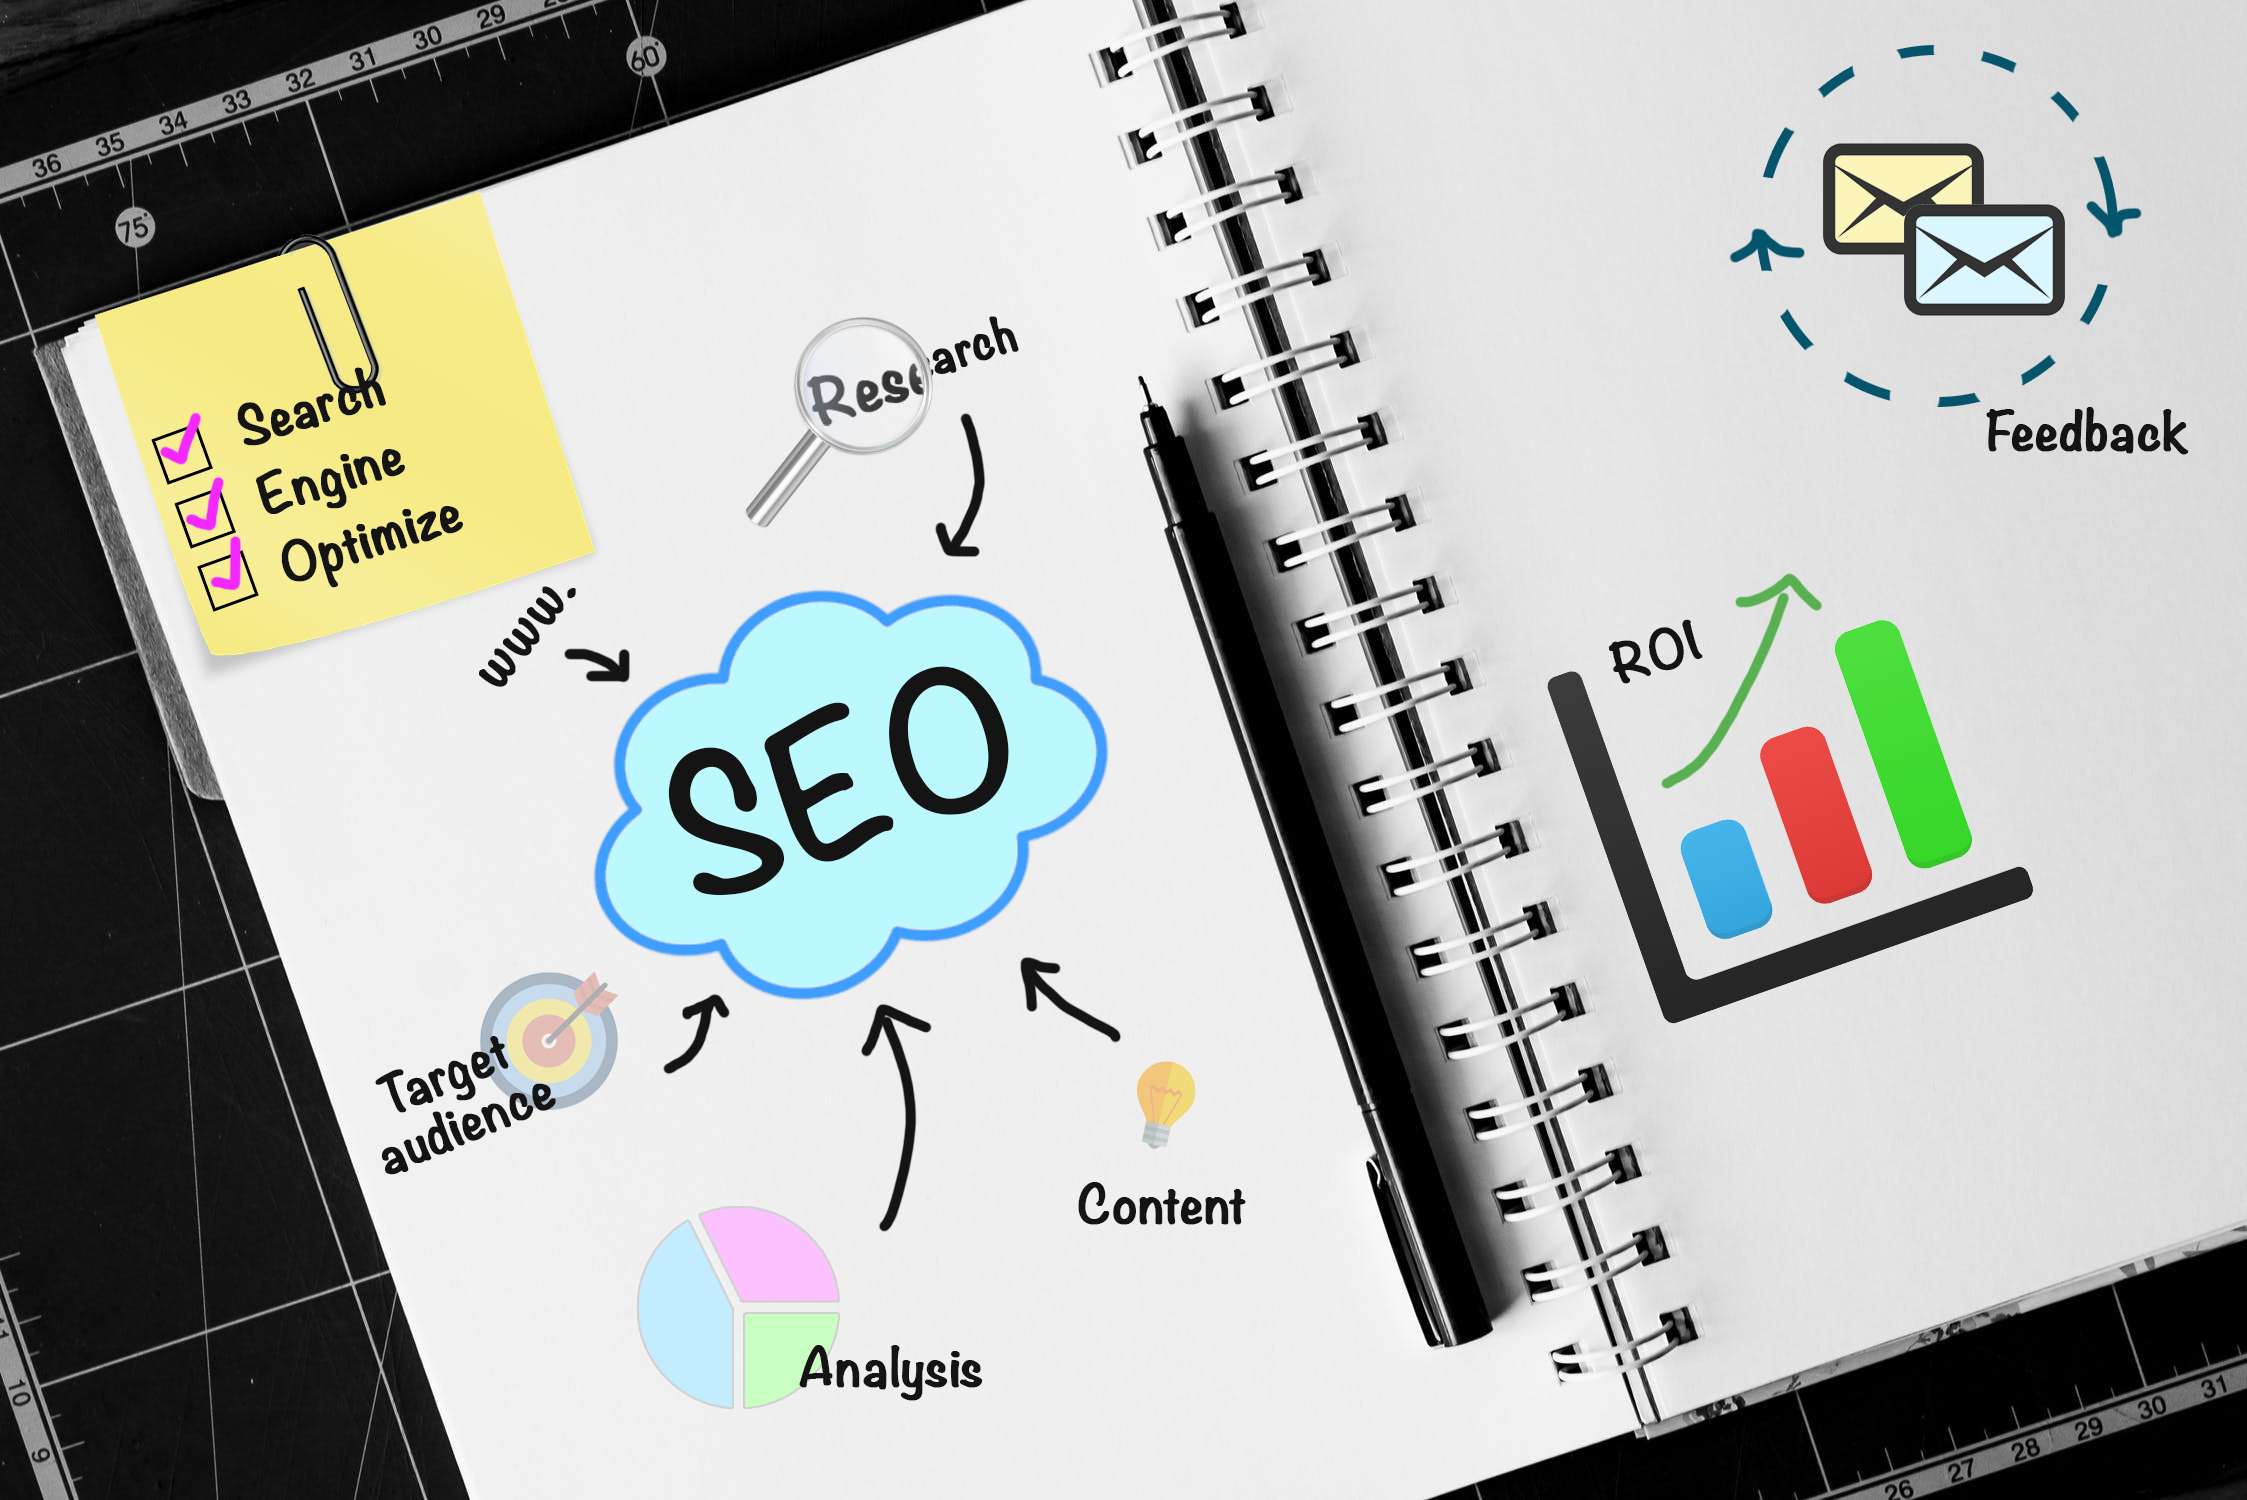 Here are 5 Big fat myths about SEO, Debunked